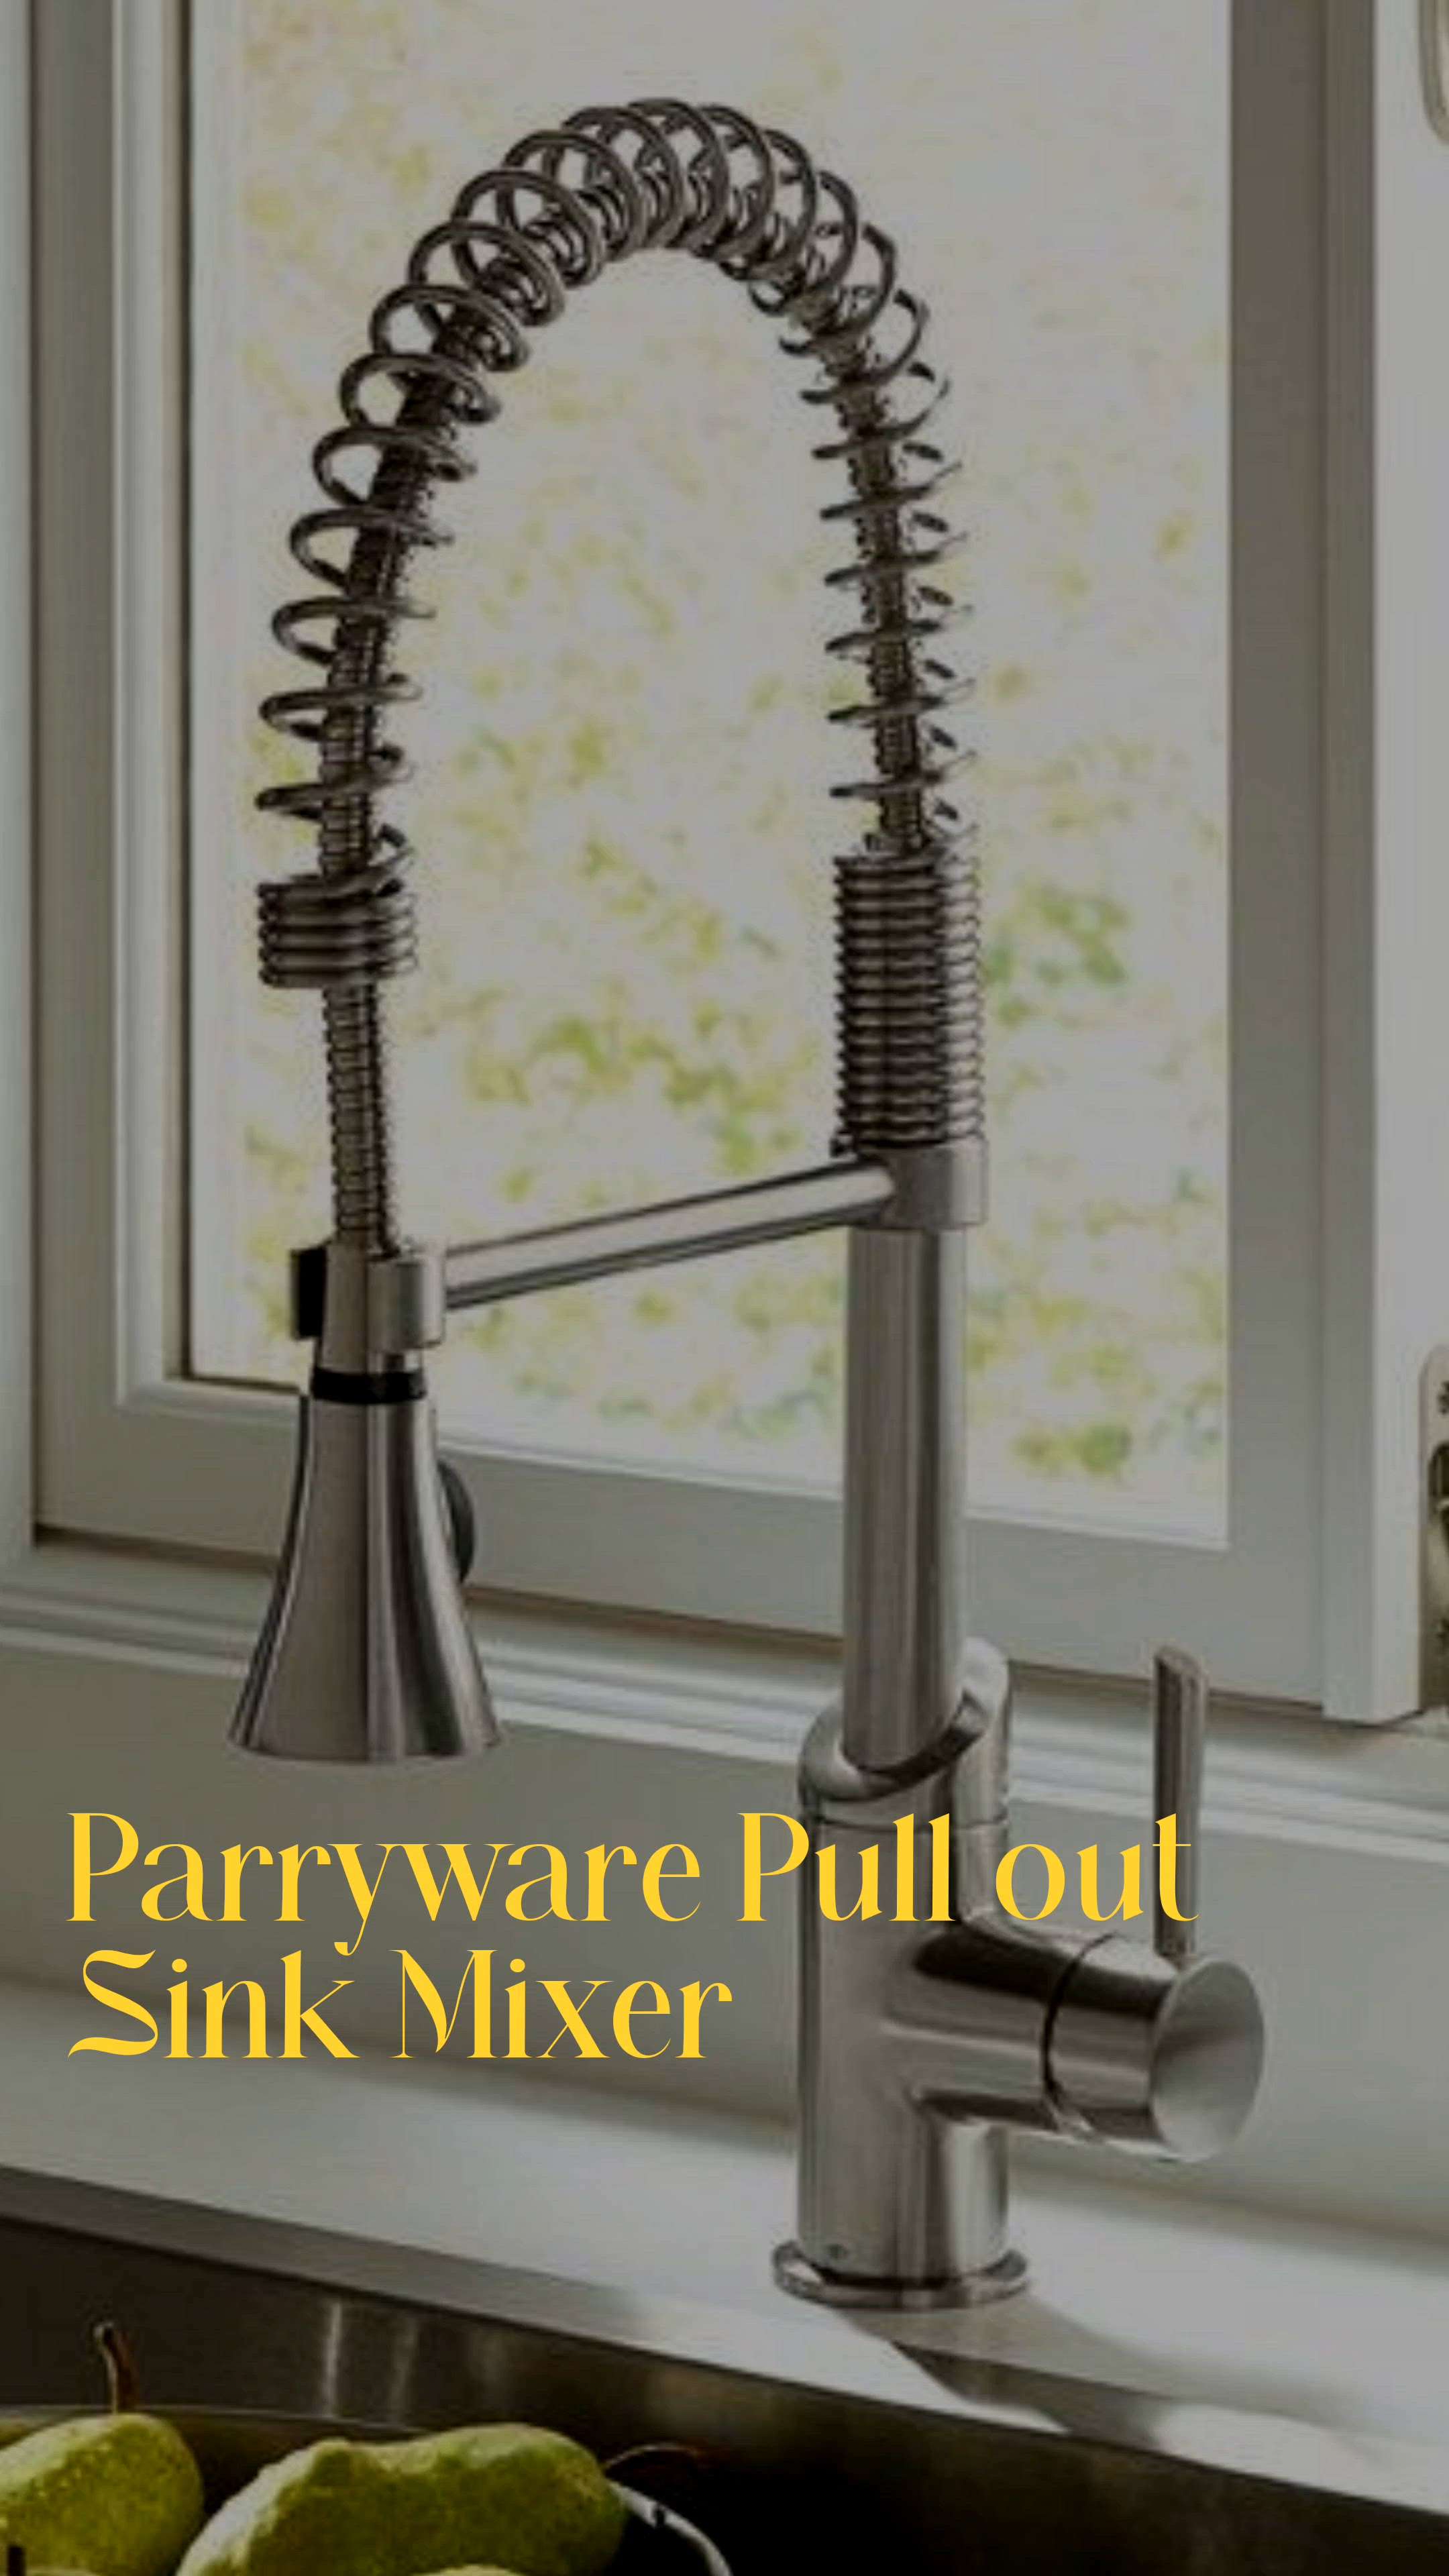 PARRYWARE PULL OUT SINK MIXER
SERIES: PLUTO
FINISH: CHROME
FEATURES: SEMI PROFESSIONAL, TABLE MOUNTED FLEXIBLE ARM HAND SHOWER SPOUT, ATTRACTIVE & NEW TREND OF ALL KITCHEN, PULL OUT METHOD WILL HELPS TO REACH ALL THE SINK AREA.

 #Parryware #pullout kitchen faucet #sinkmixers #sanitaryshopping  #bestforkitchen #kolo #bestprice #trendingkitchen